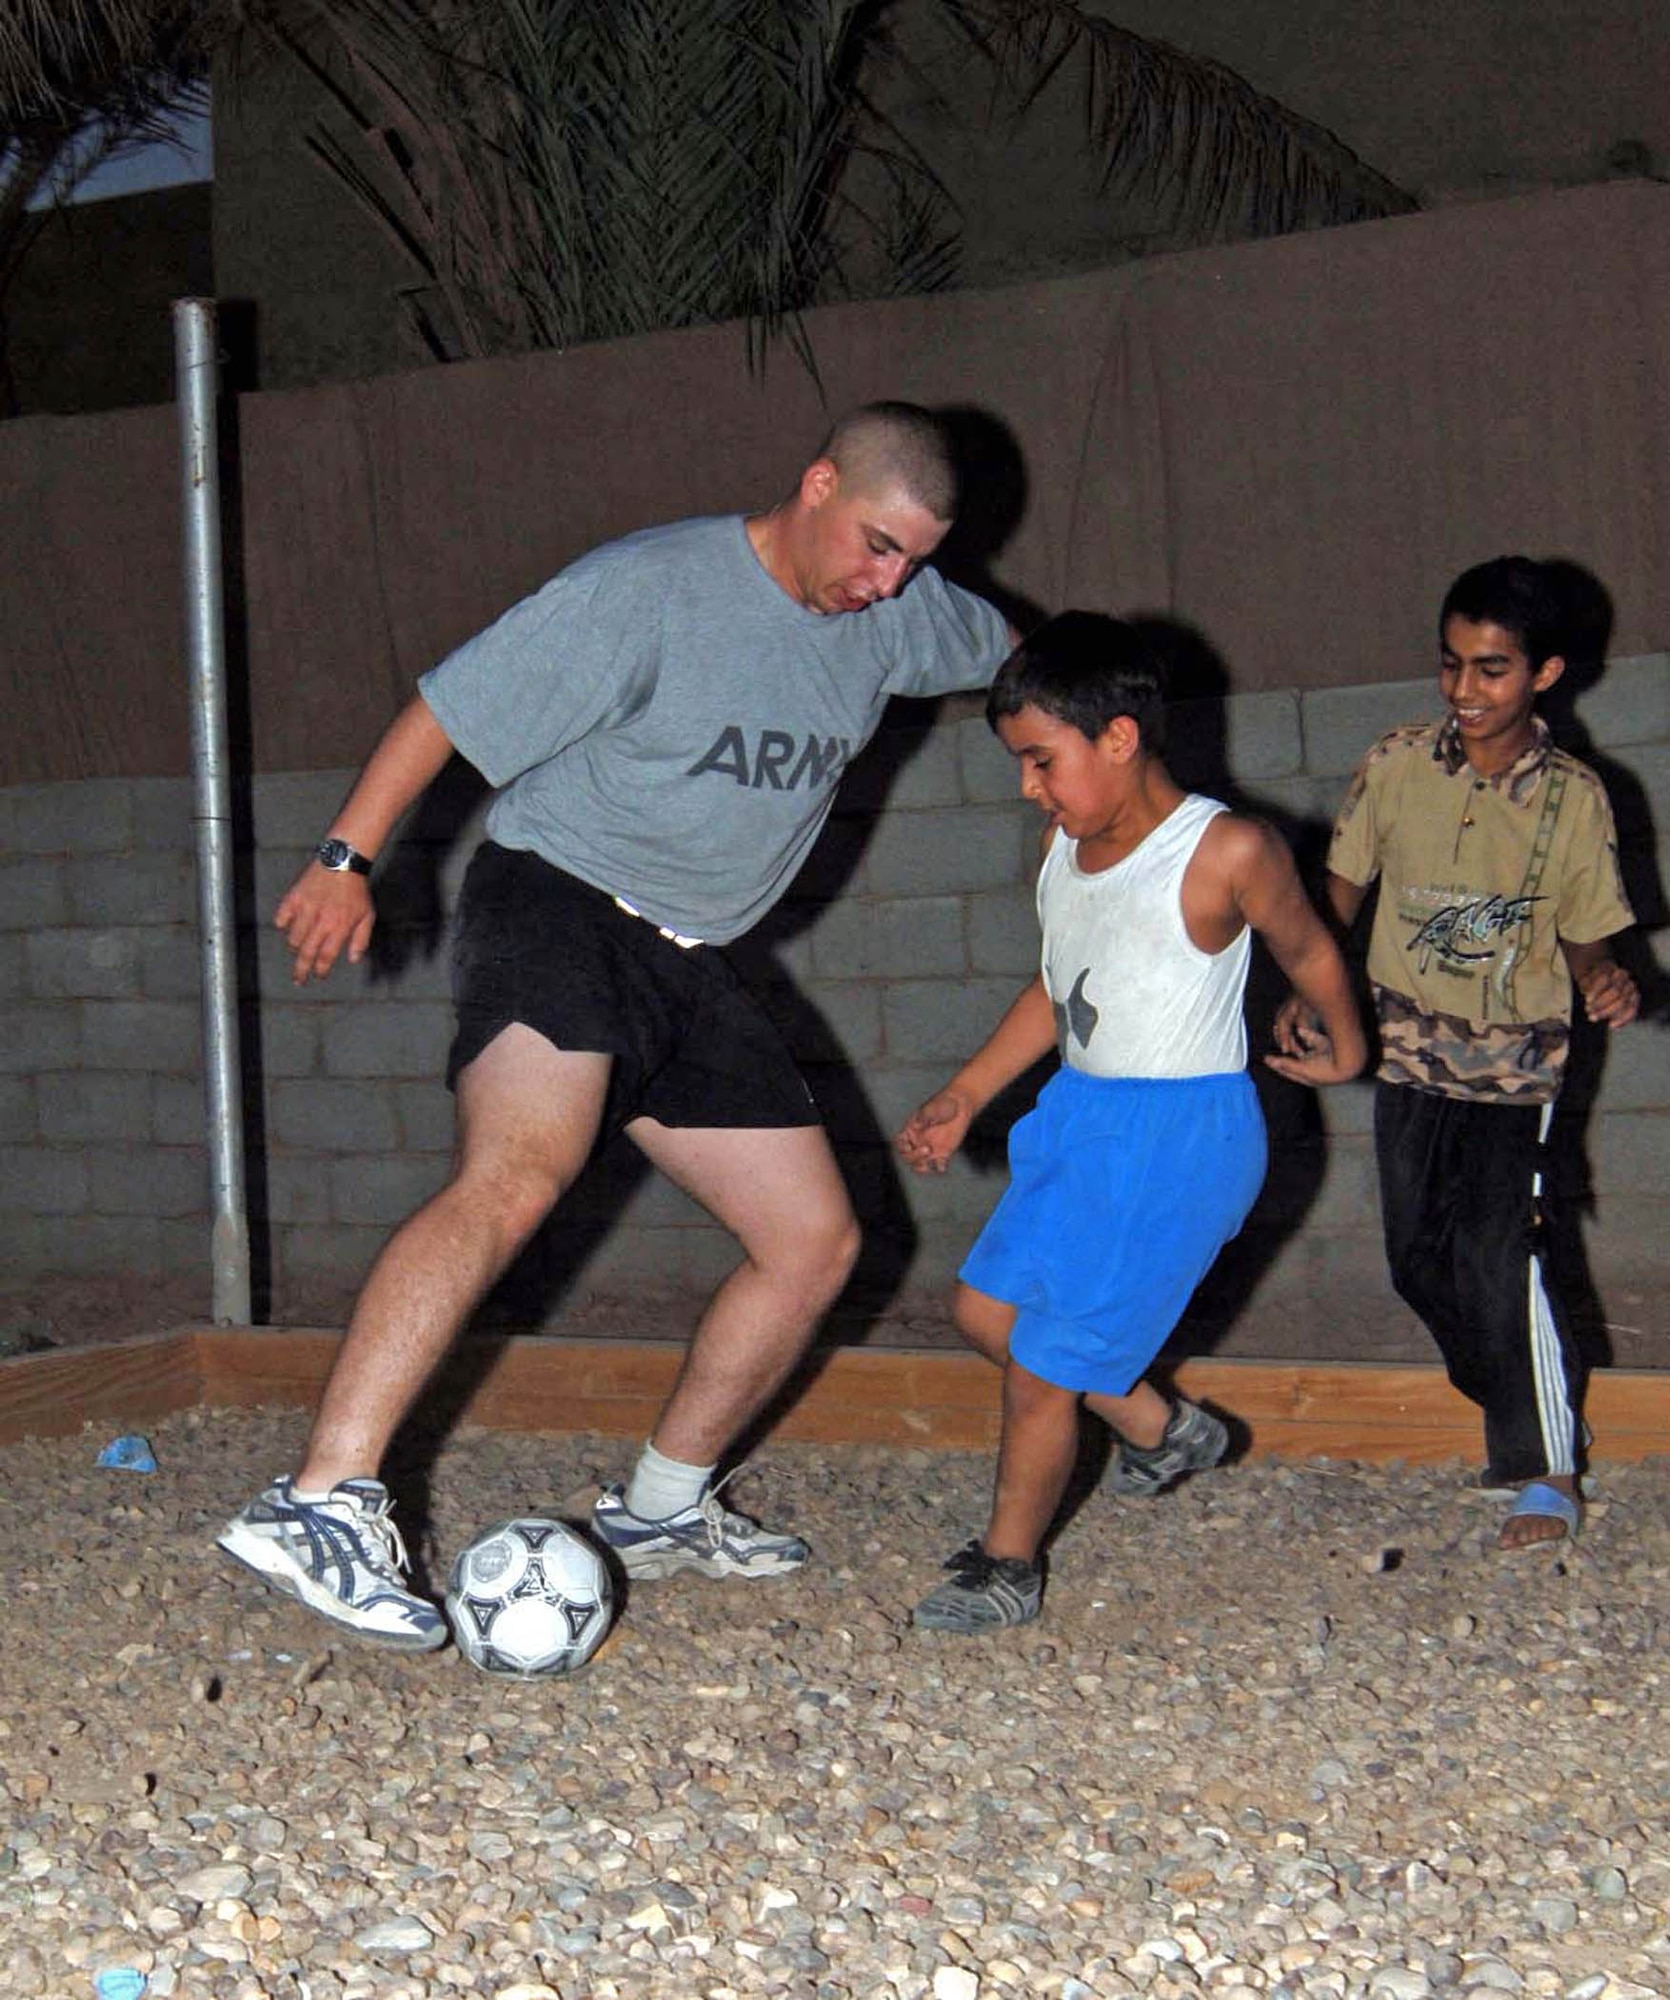 Army Spc. Kyle Hanlan plays an impromptu game of soccer with Iraqi children at the Victory Base Complex in Iraq. The visit was part of an Air Force effort to provide humanitarian aide to children of Iraqi soldiers. Specialiast Hanlan is a 447th Expeditionary Security Forces Squadron patrolman. (U.S. Air Force photo/Tech. Sgt. Russell Wicke)